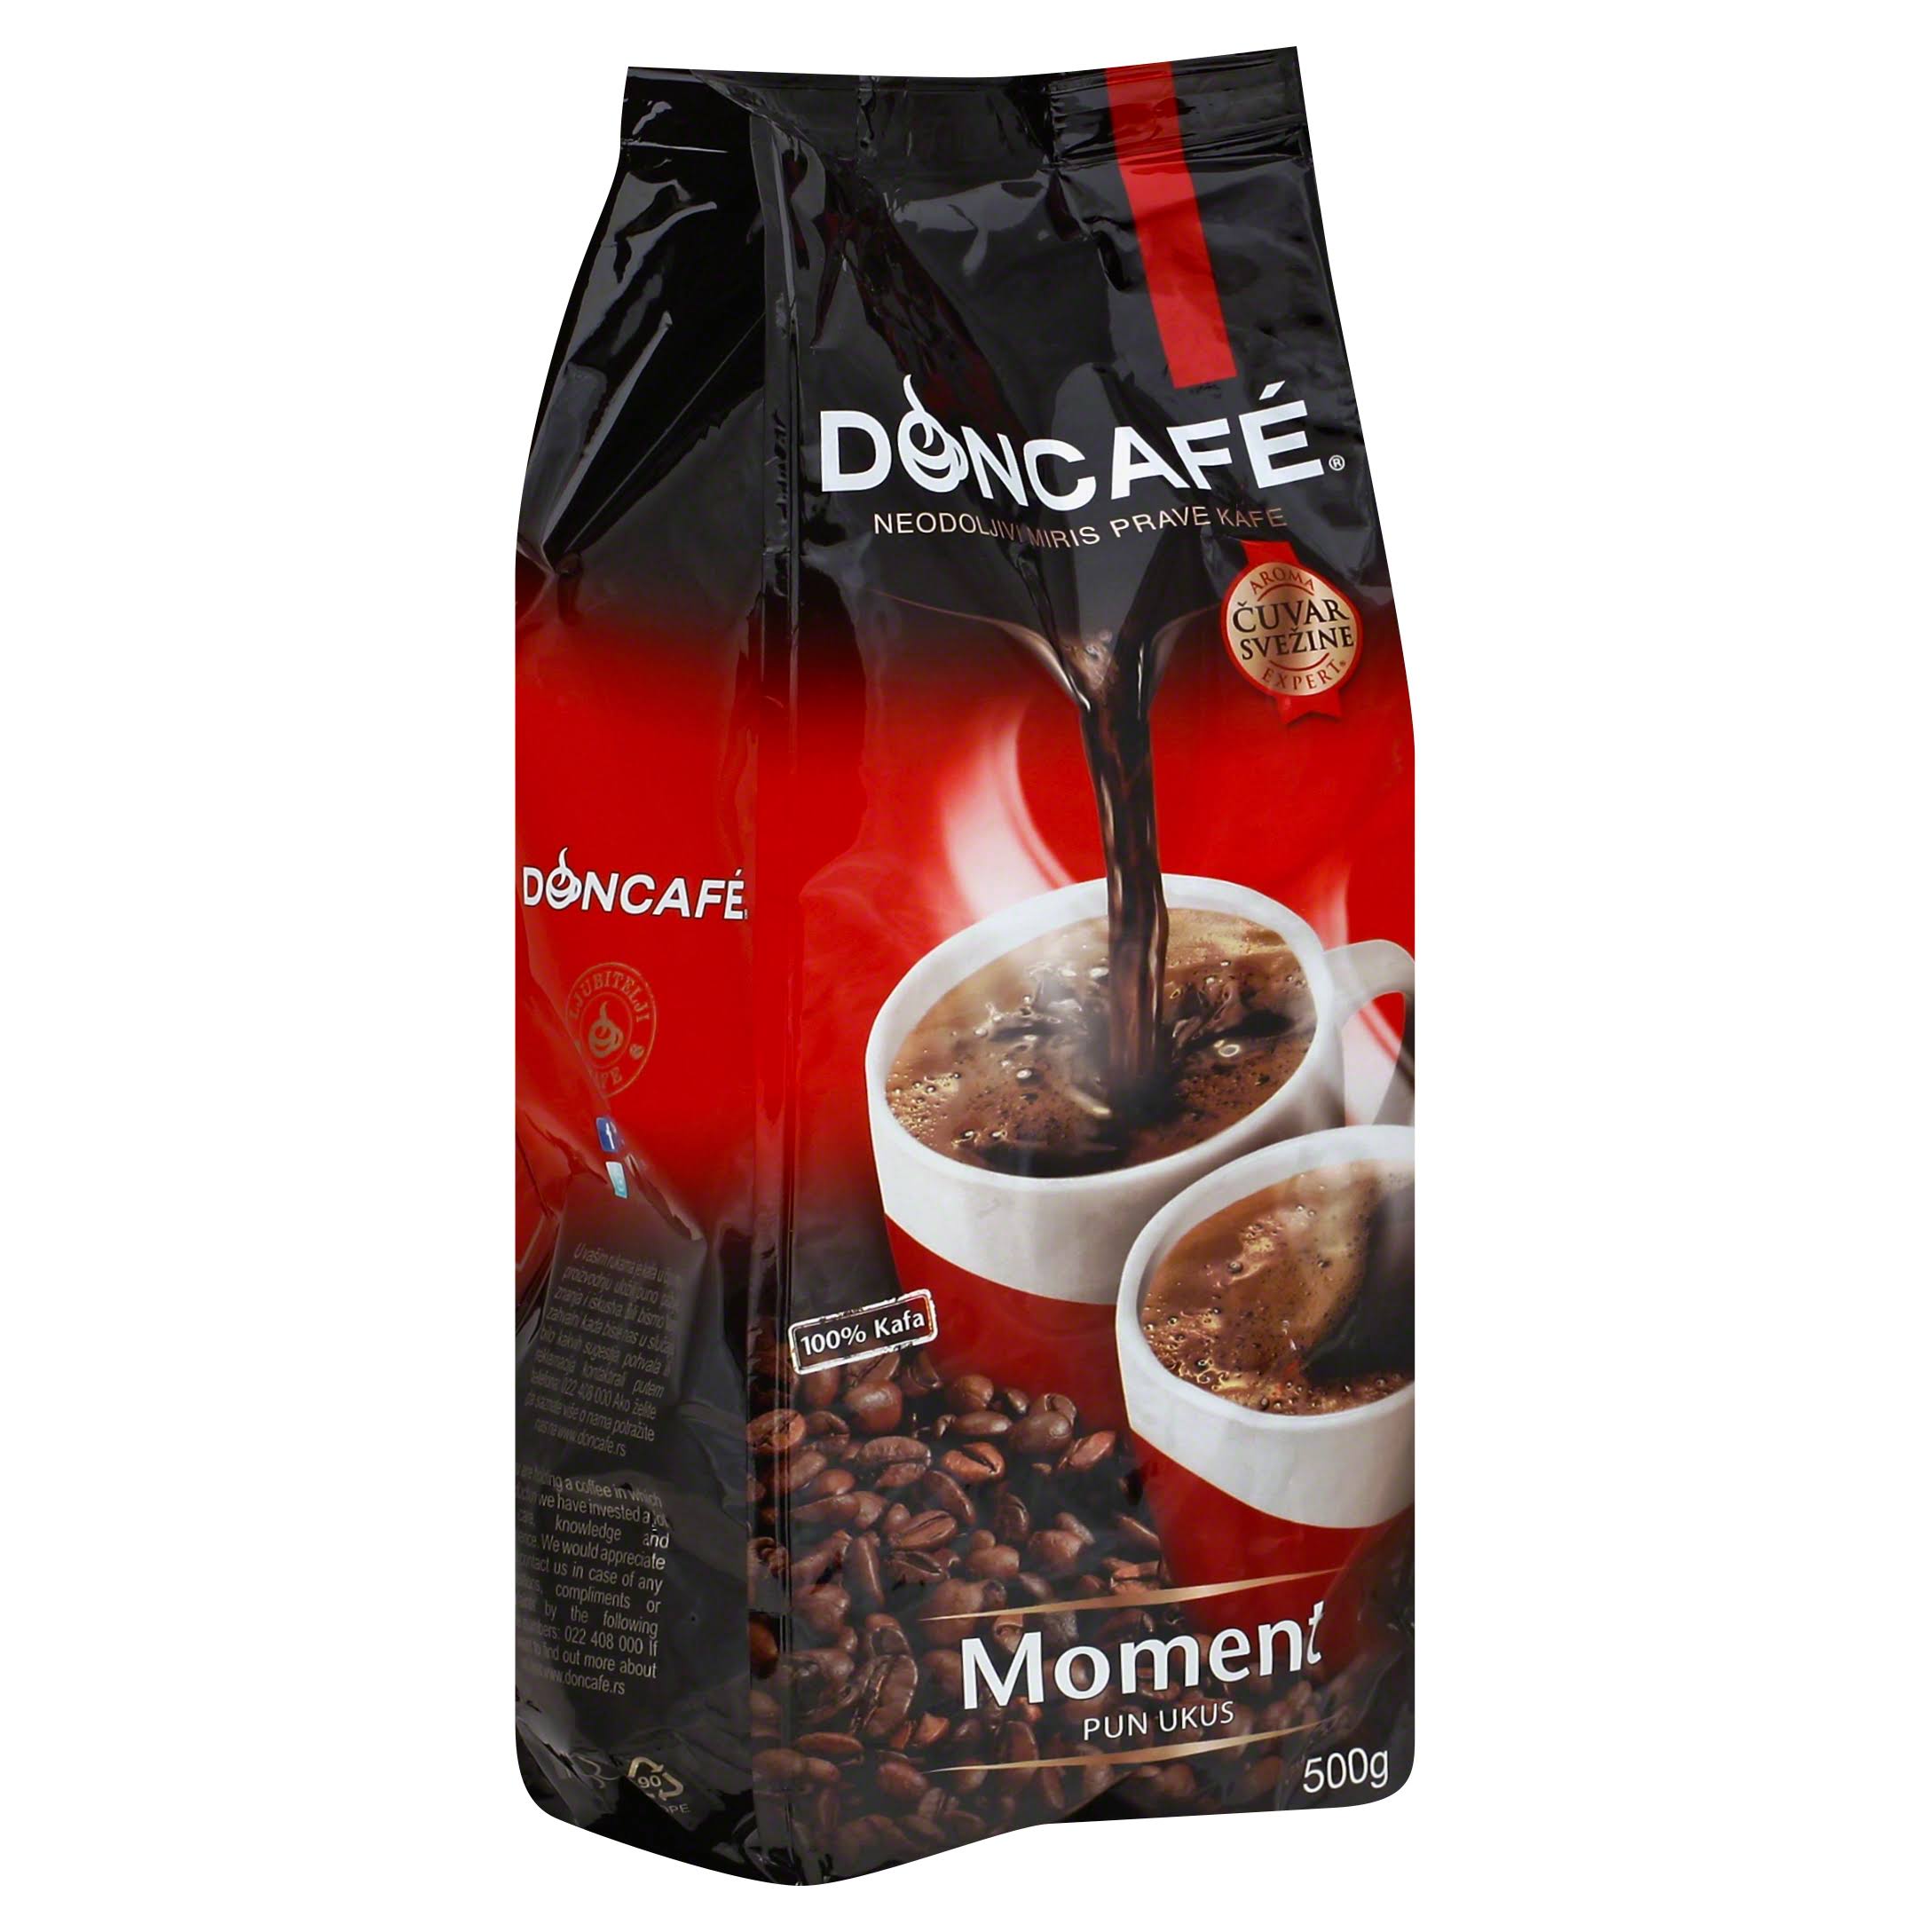 Doncafe Coffee, Ground, Moment - 17.6 oz